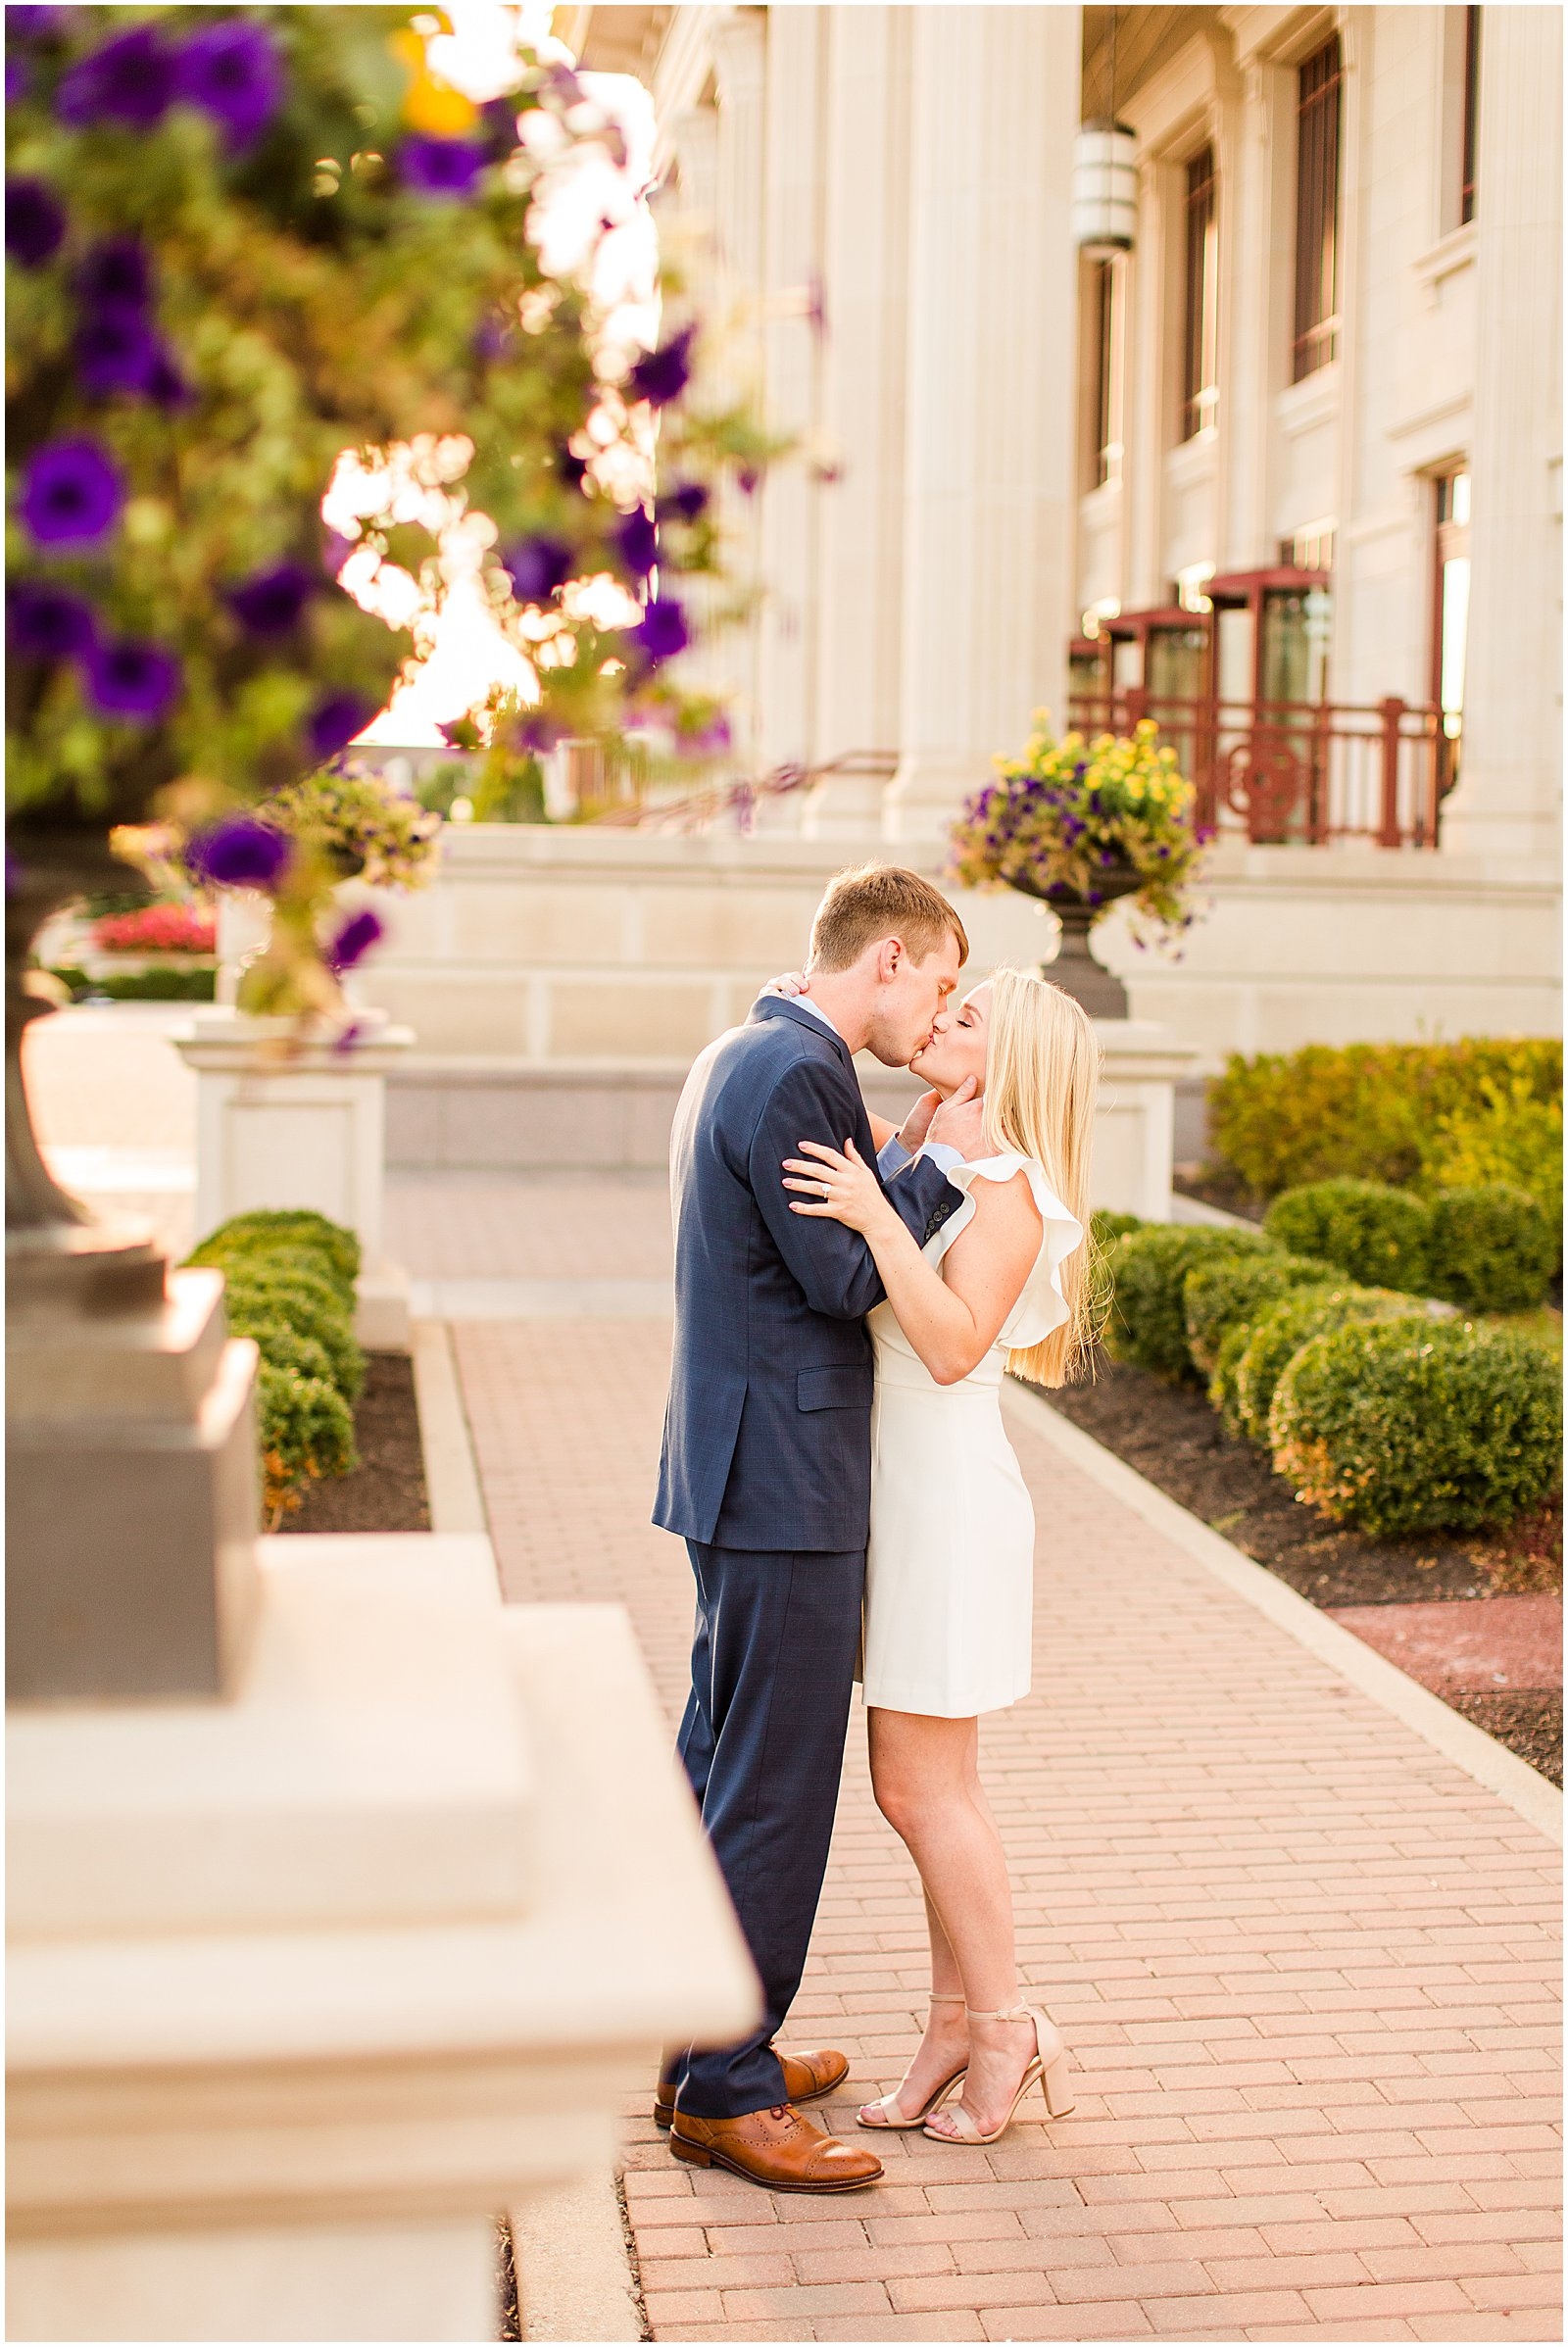 A Cute and Cuddly Engagement Session in Carmel, IN | Abbi and Josh0028.jpg